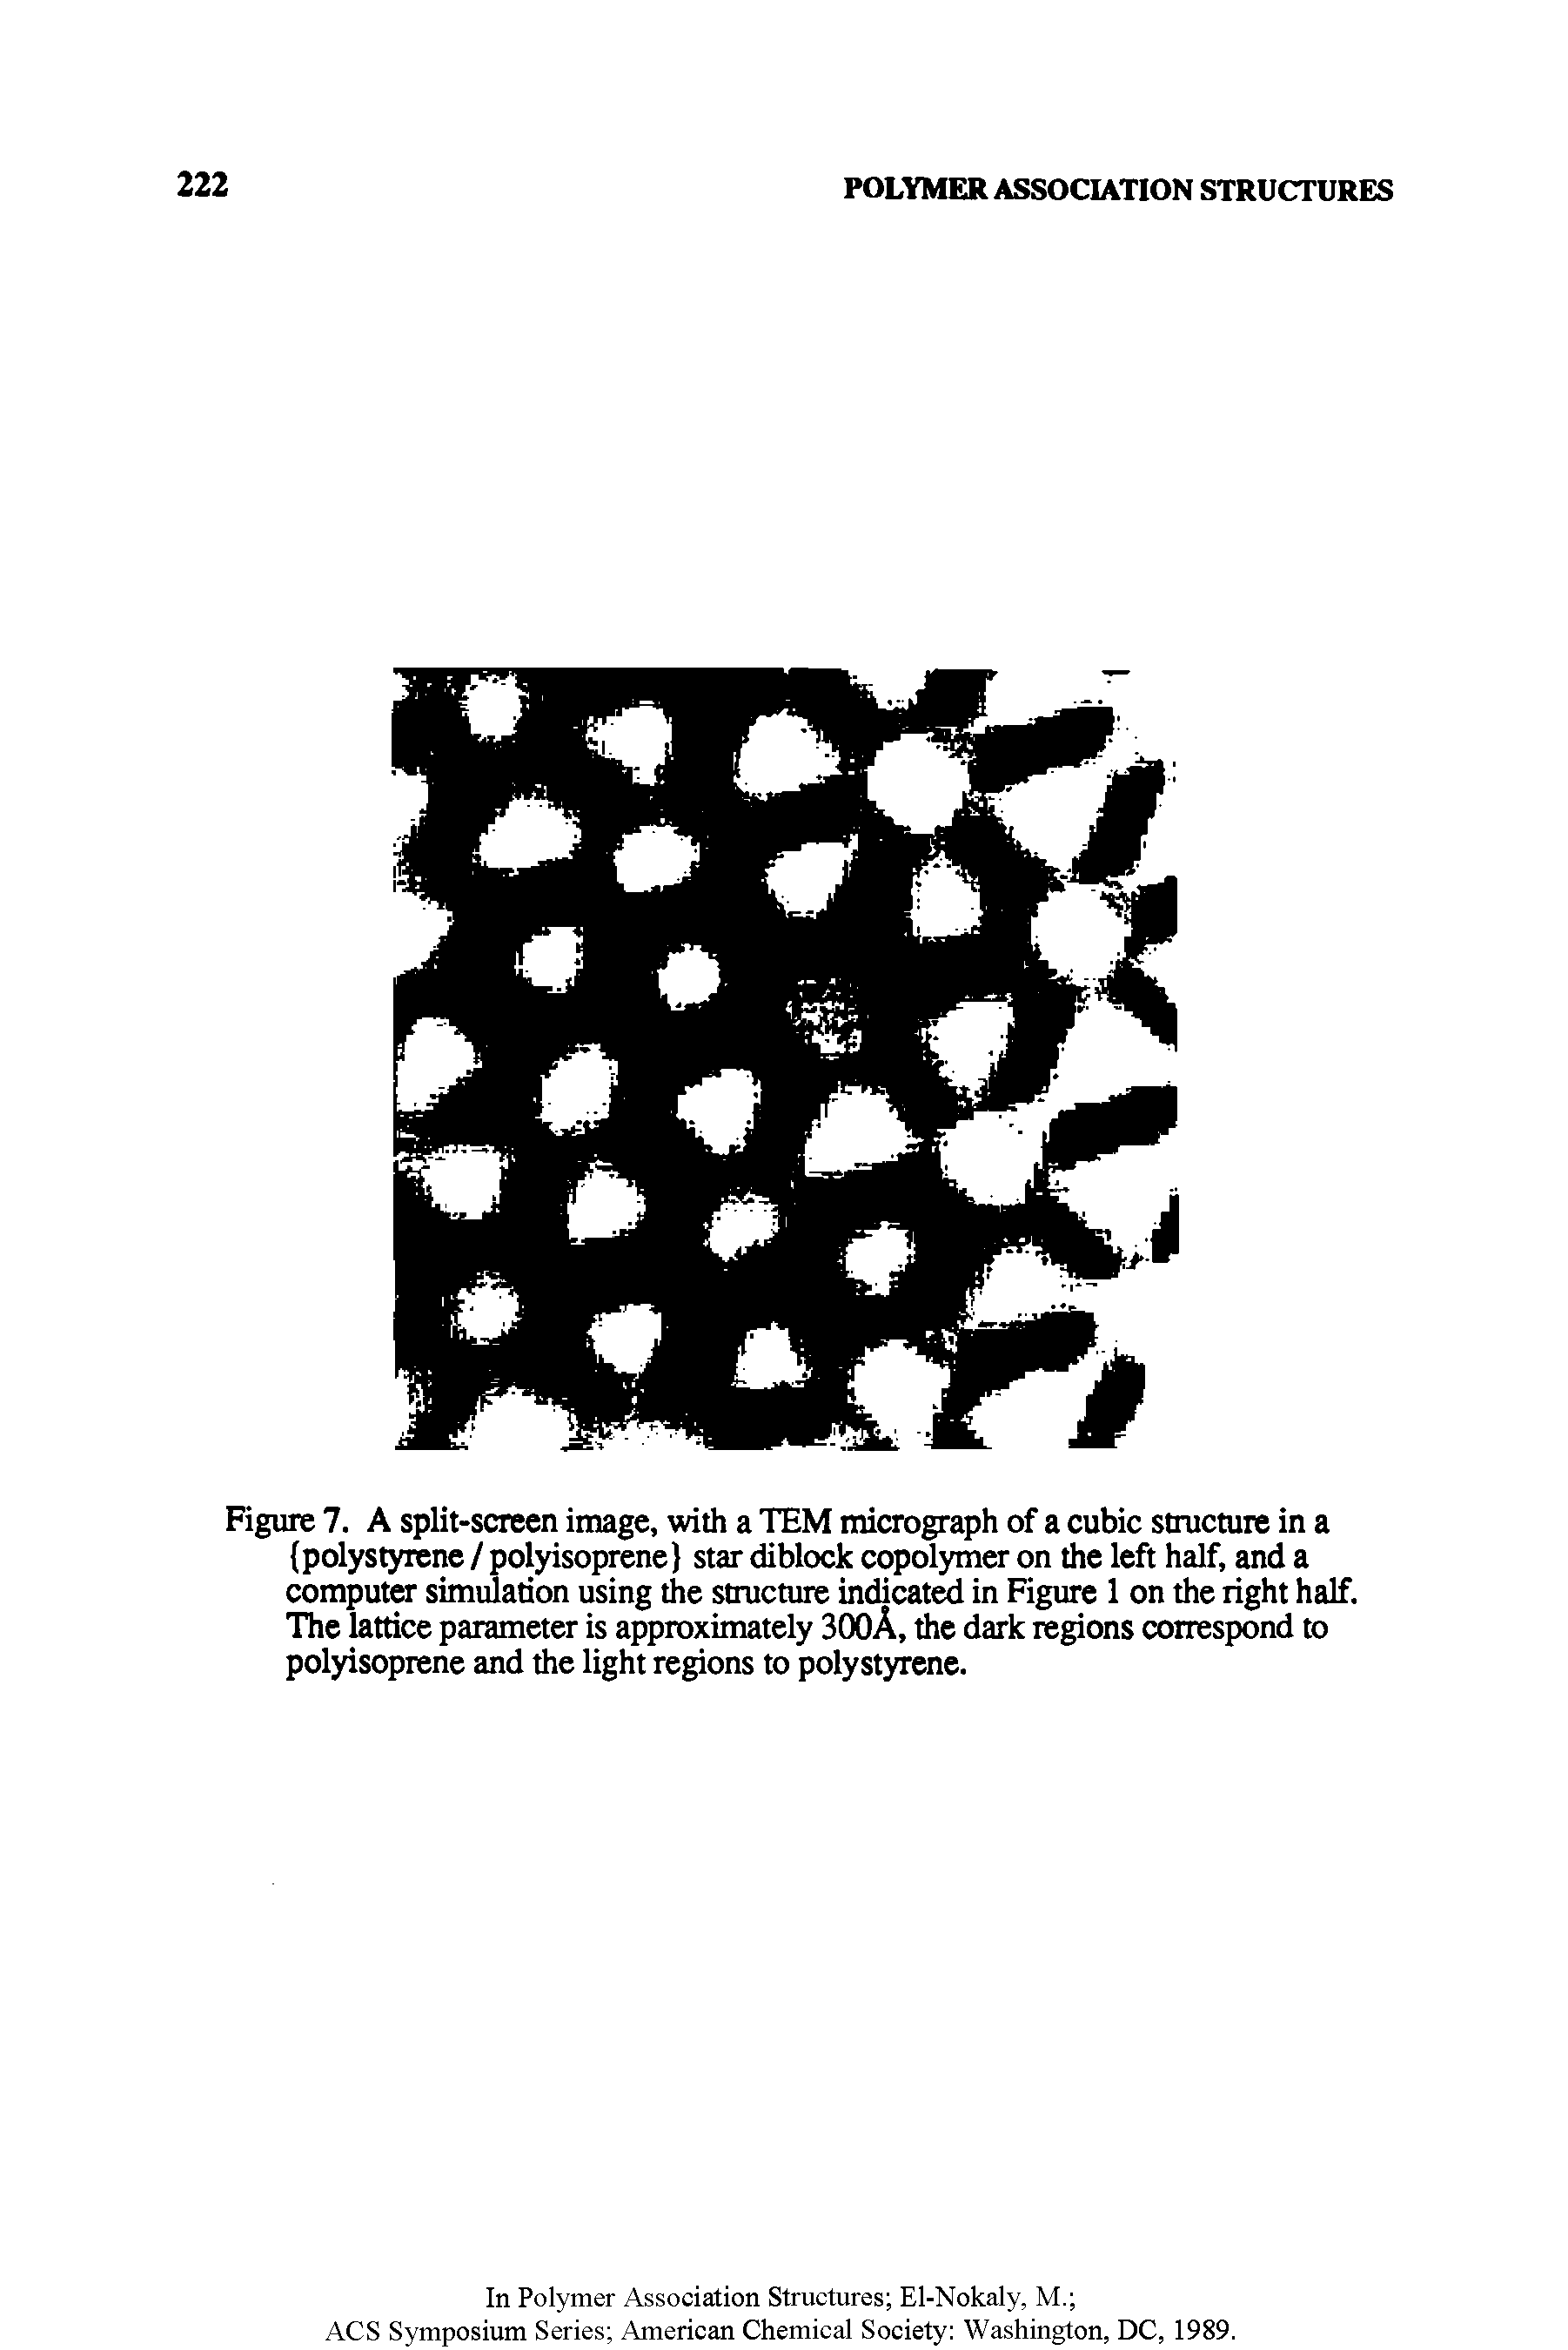 Figure 7. A split-screen image, with a TEM micrograph of a cubic structure in a polystyrene / polyisoprene star diblock copolynaer on the left half, and a computer simulation using the structure indicate in Figure 1 on the right half. The lattice parameter is approximately 300A, the dark regions correspond to polyisoprene and the light regions to polystyrene.